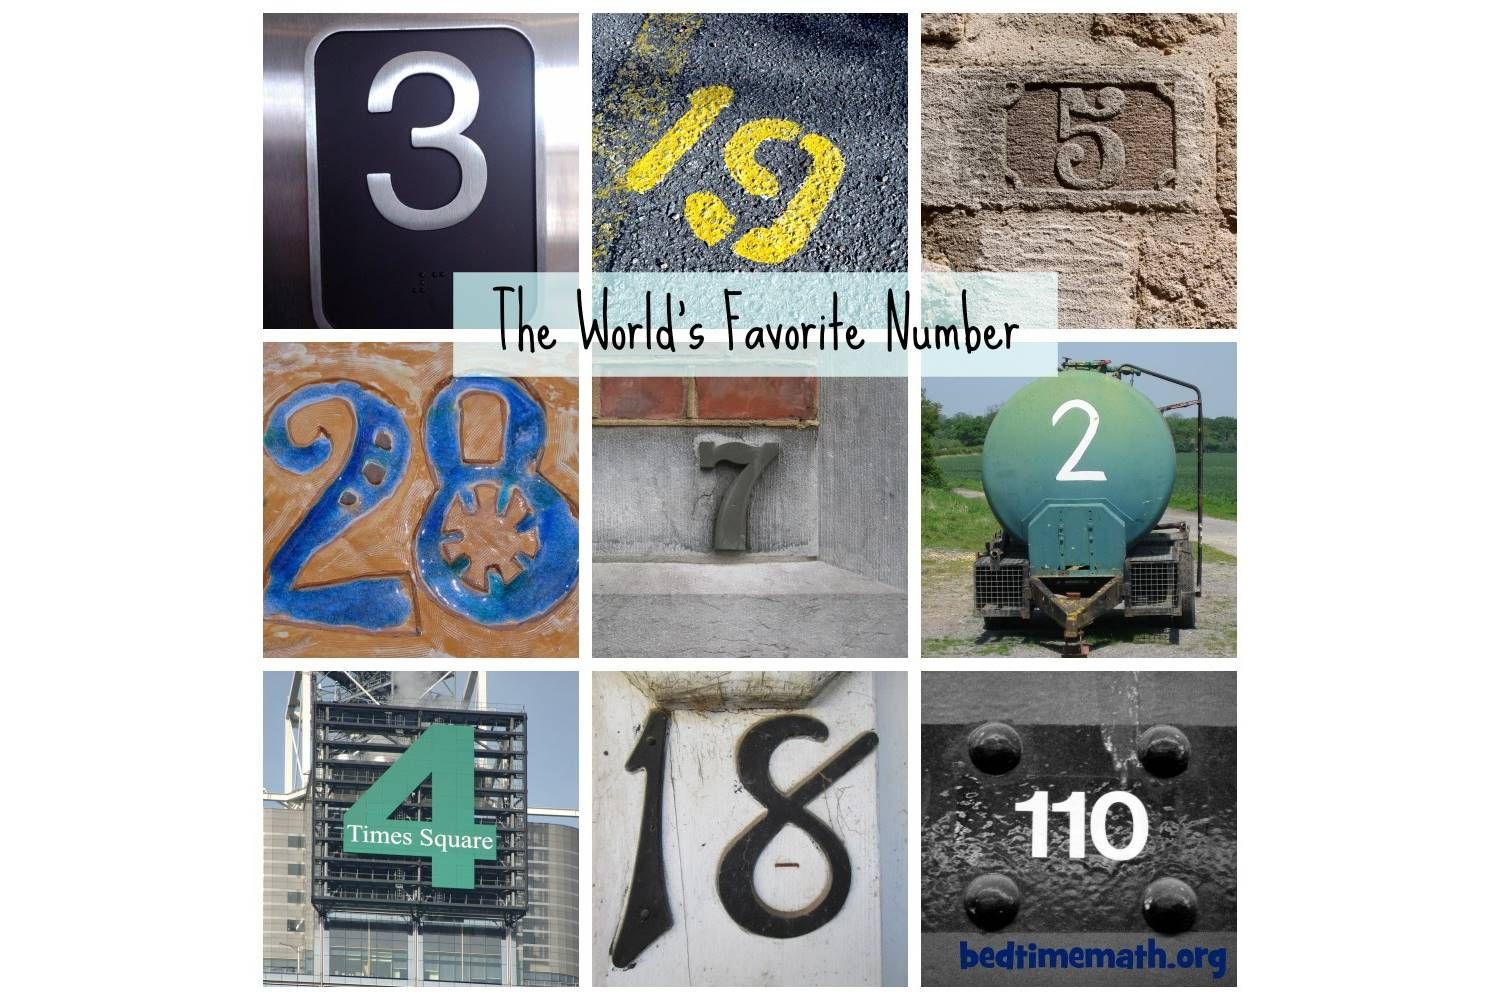 The World’s Favorite Number